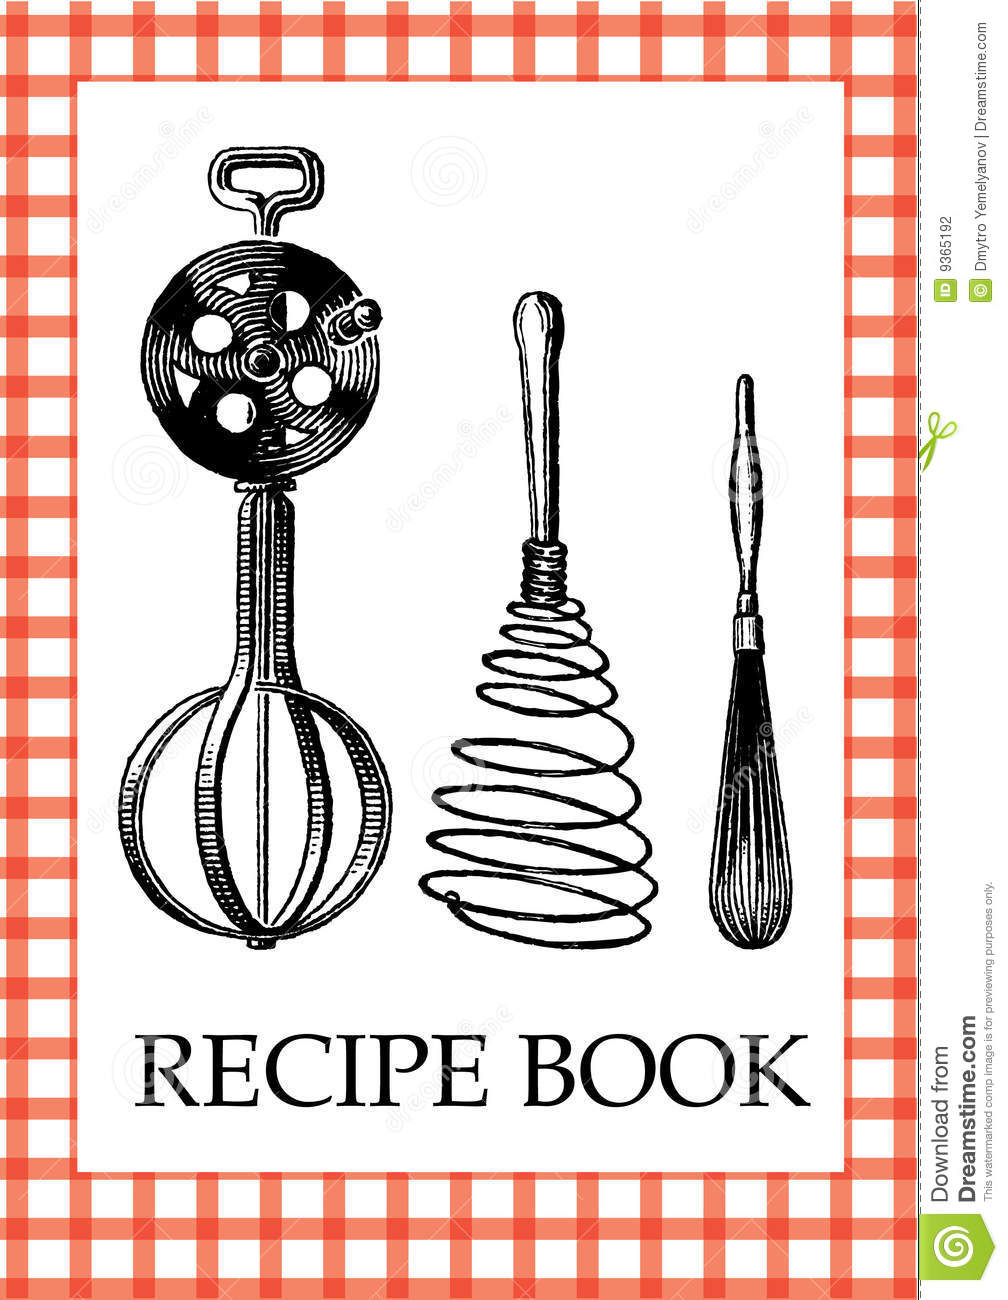 Cookbook Covers Clipart Images   Pictures   Becuo